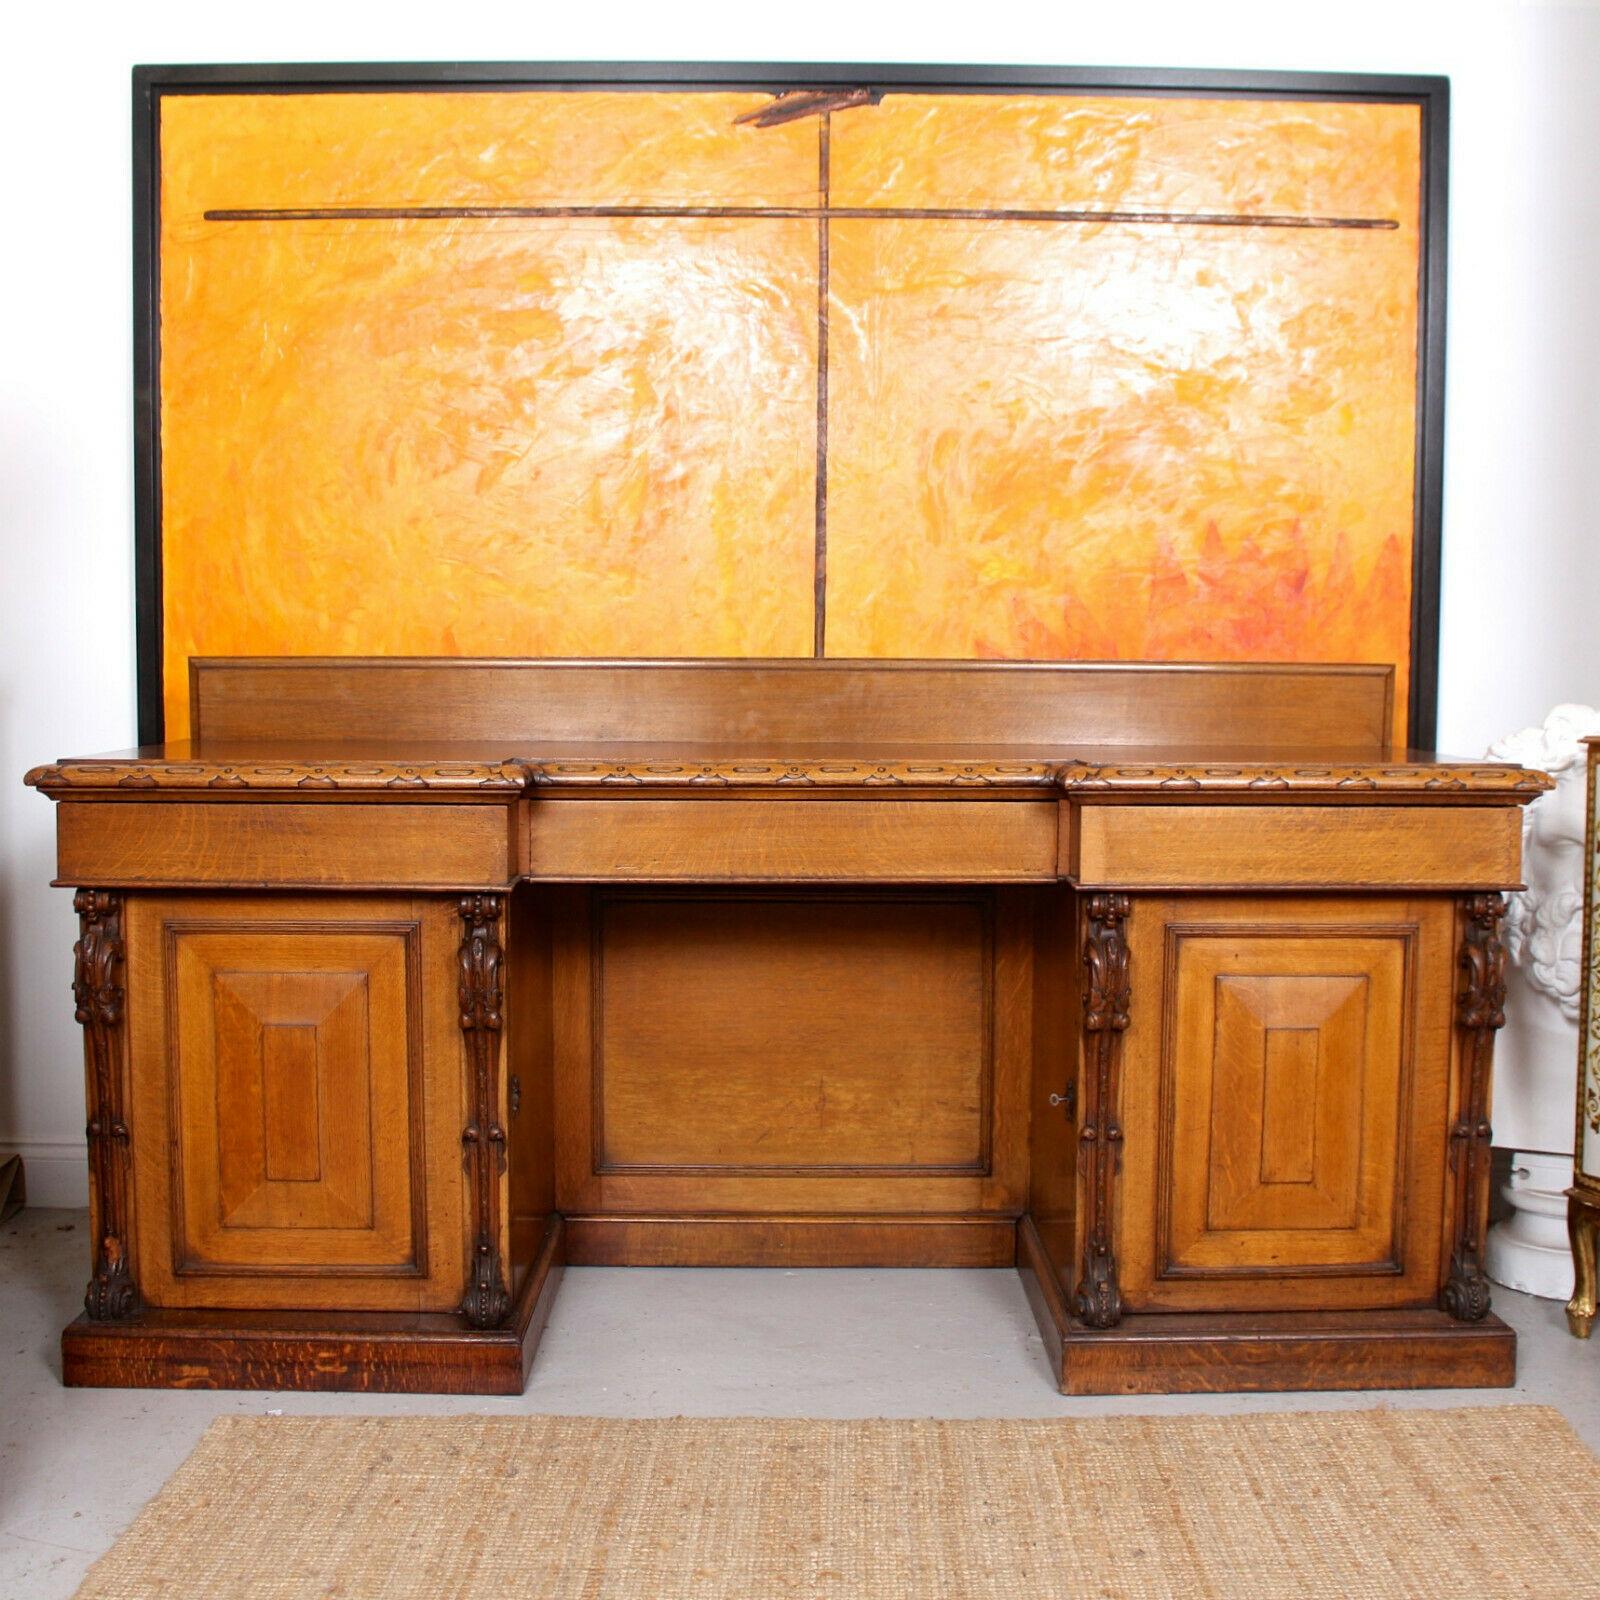 An outstanding 19th century reverse breakfront kneehole oak sideboard.

The oak boasting a rich honey patina and well figured wild golden flecked grain.

A backrail above the reverse breakfront form top with intricately carved edges fitted three